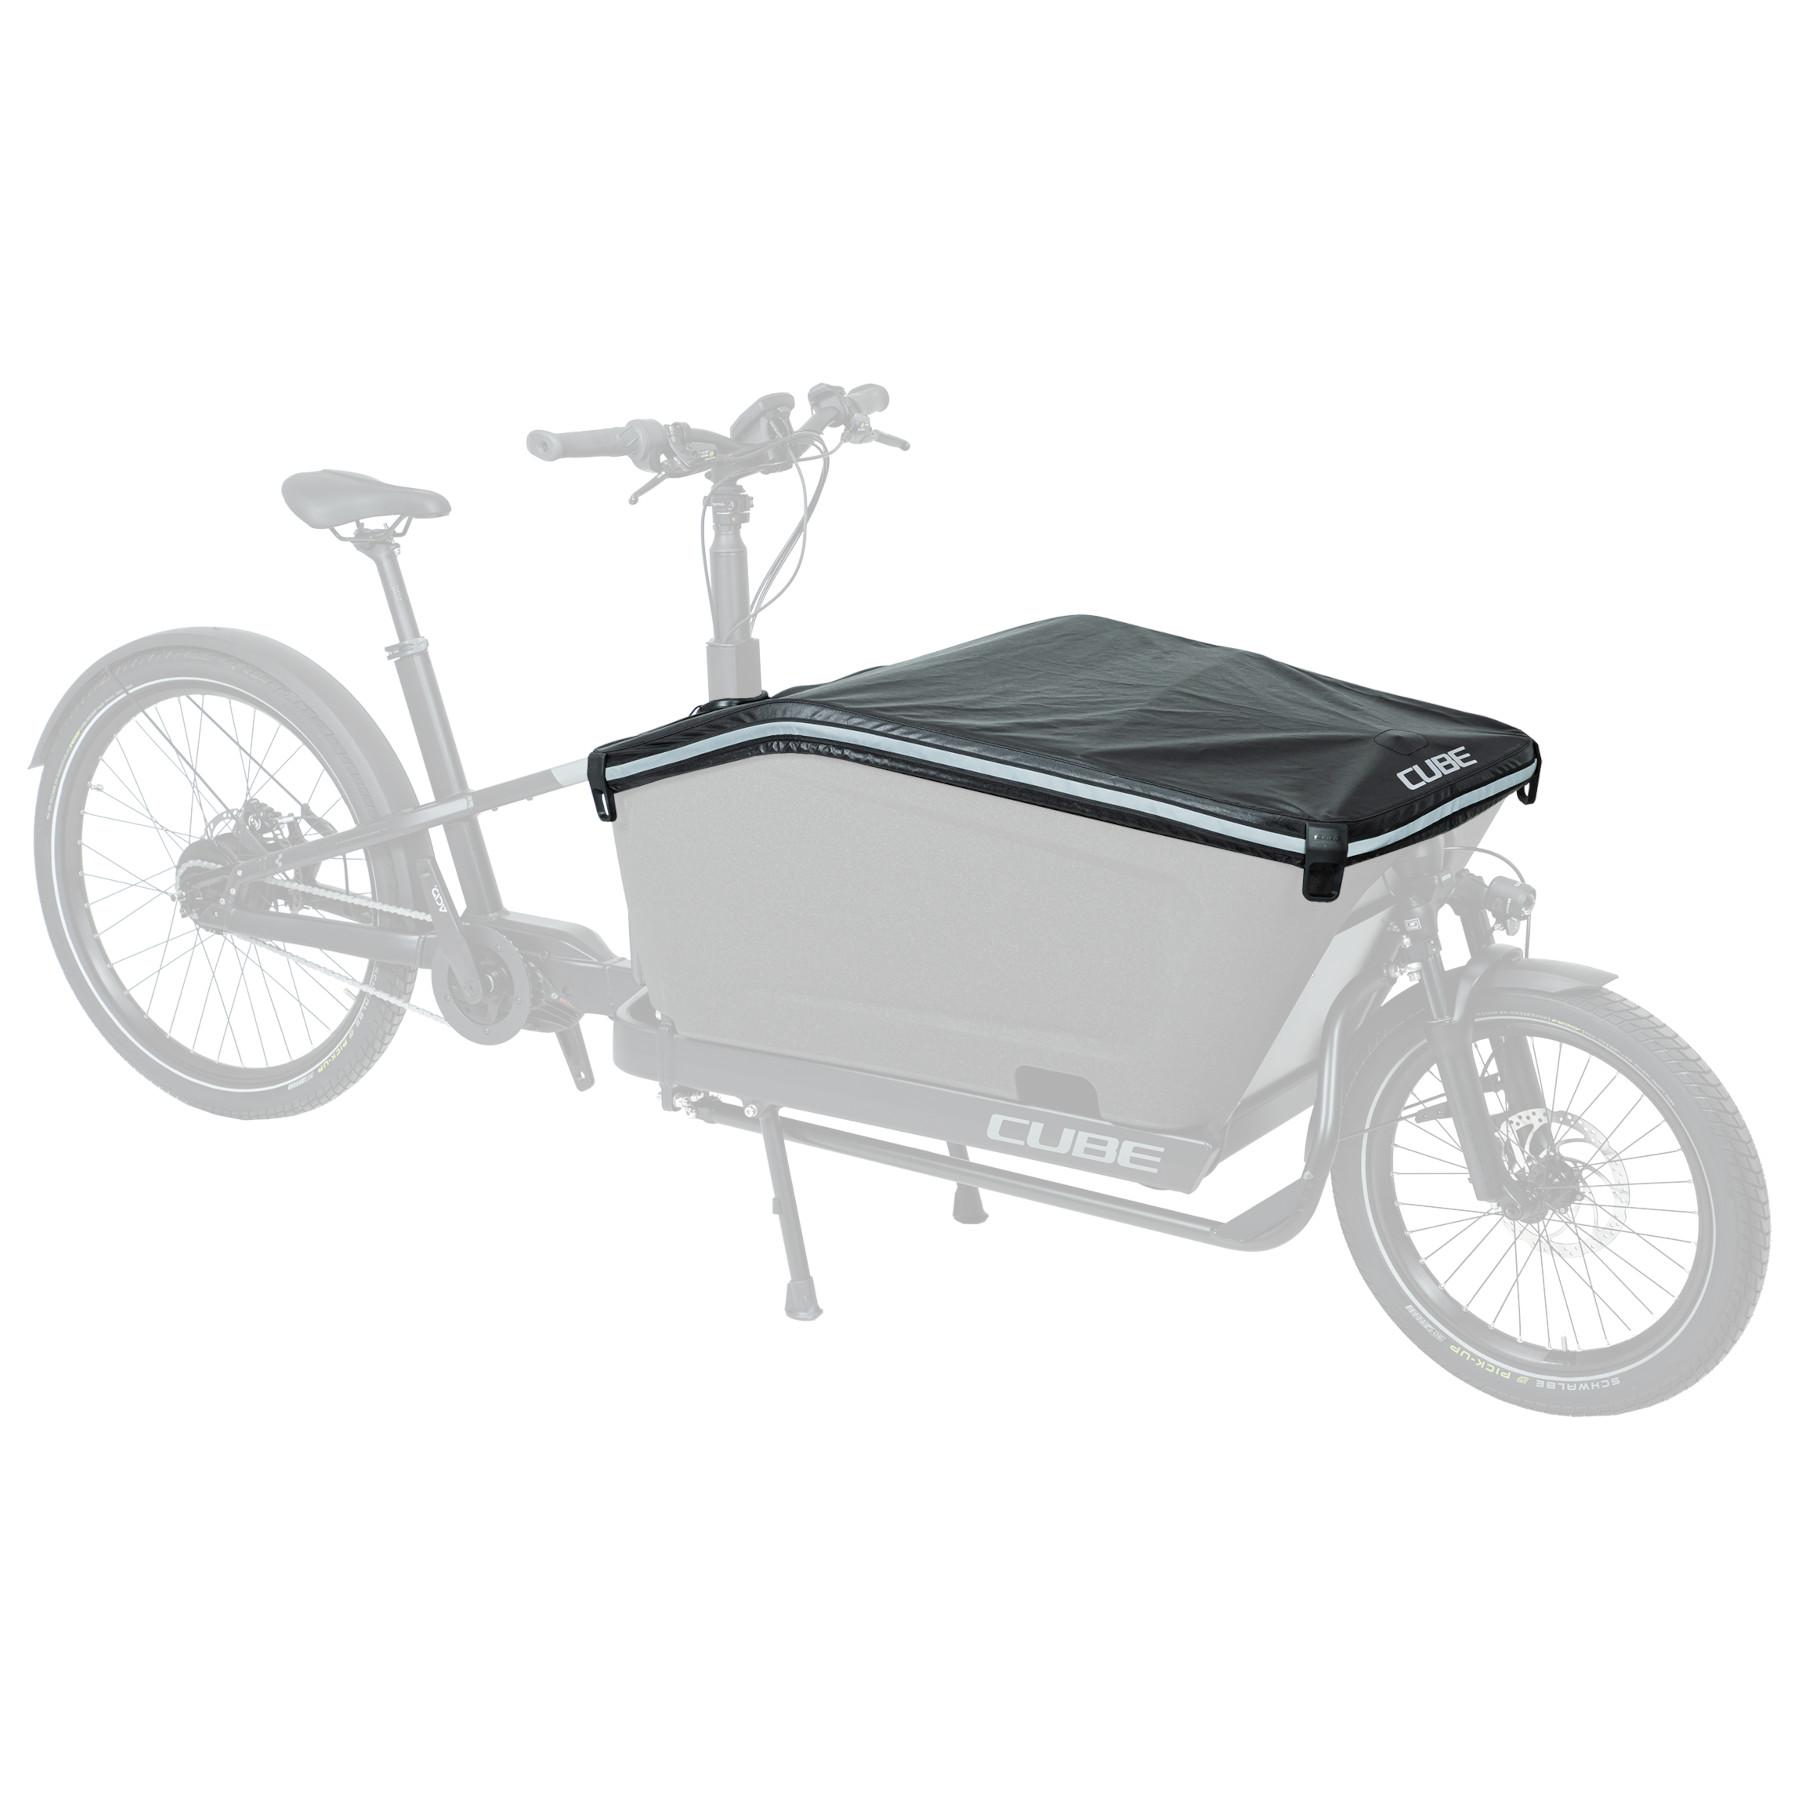 Productfoto van CUBE Cover for Cube Cargo Hybrid - without Seat Bench - black